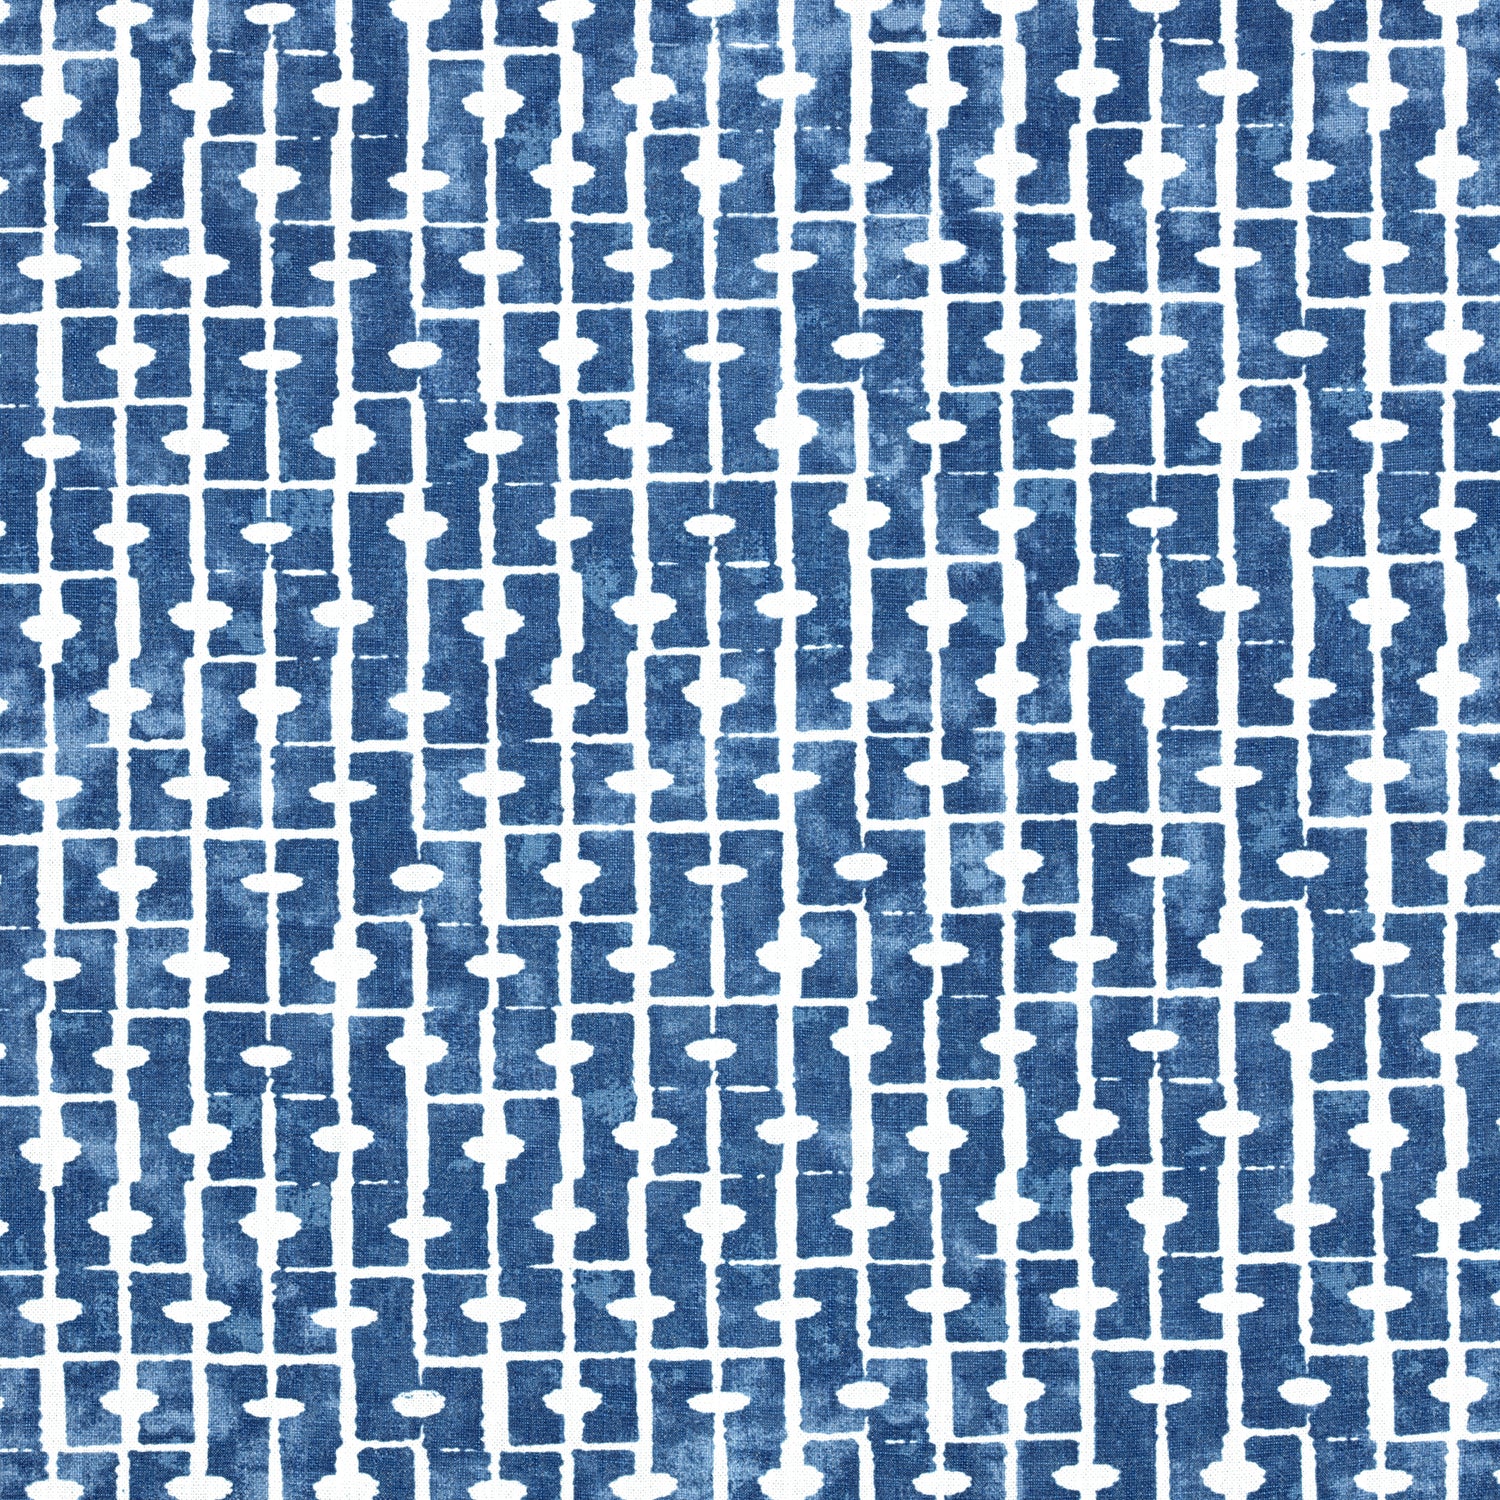 Haven fabric in navy color - pattern number F914310 - by Thibaut in the Canopy collection